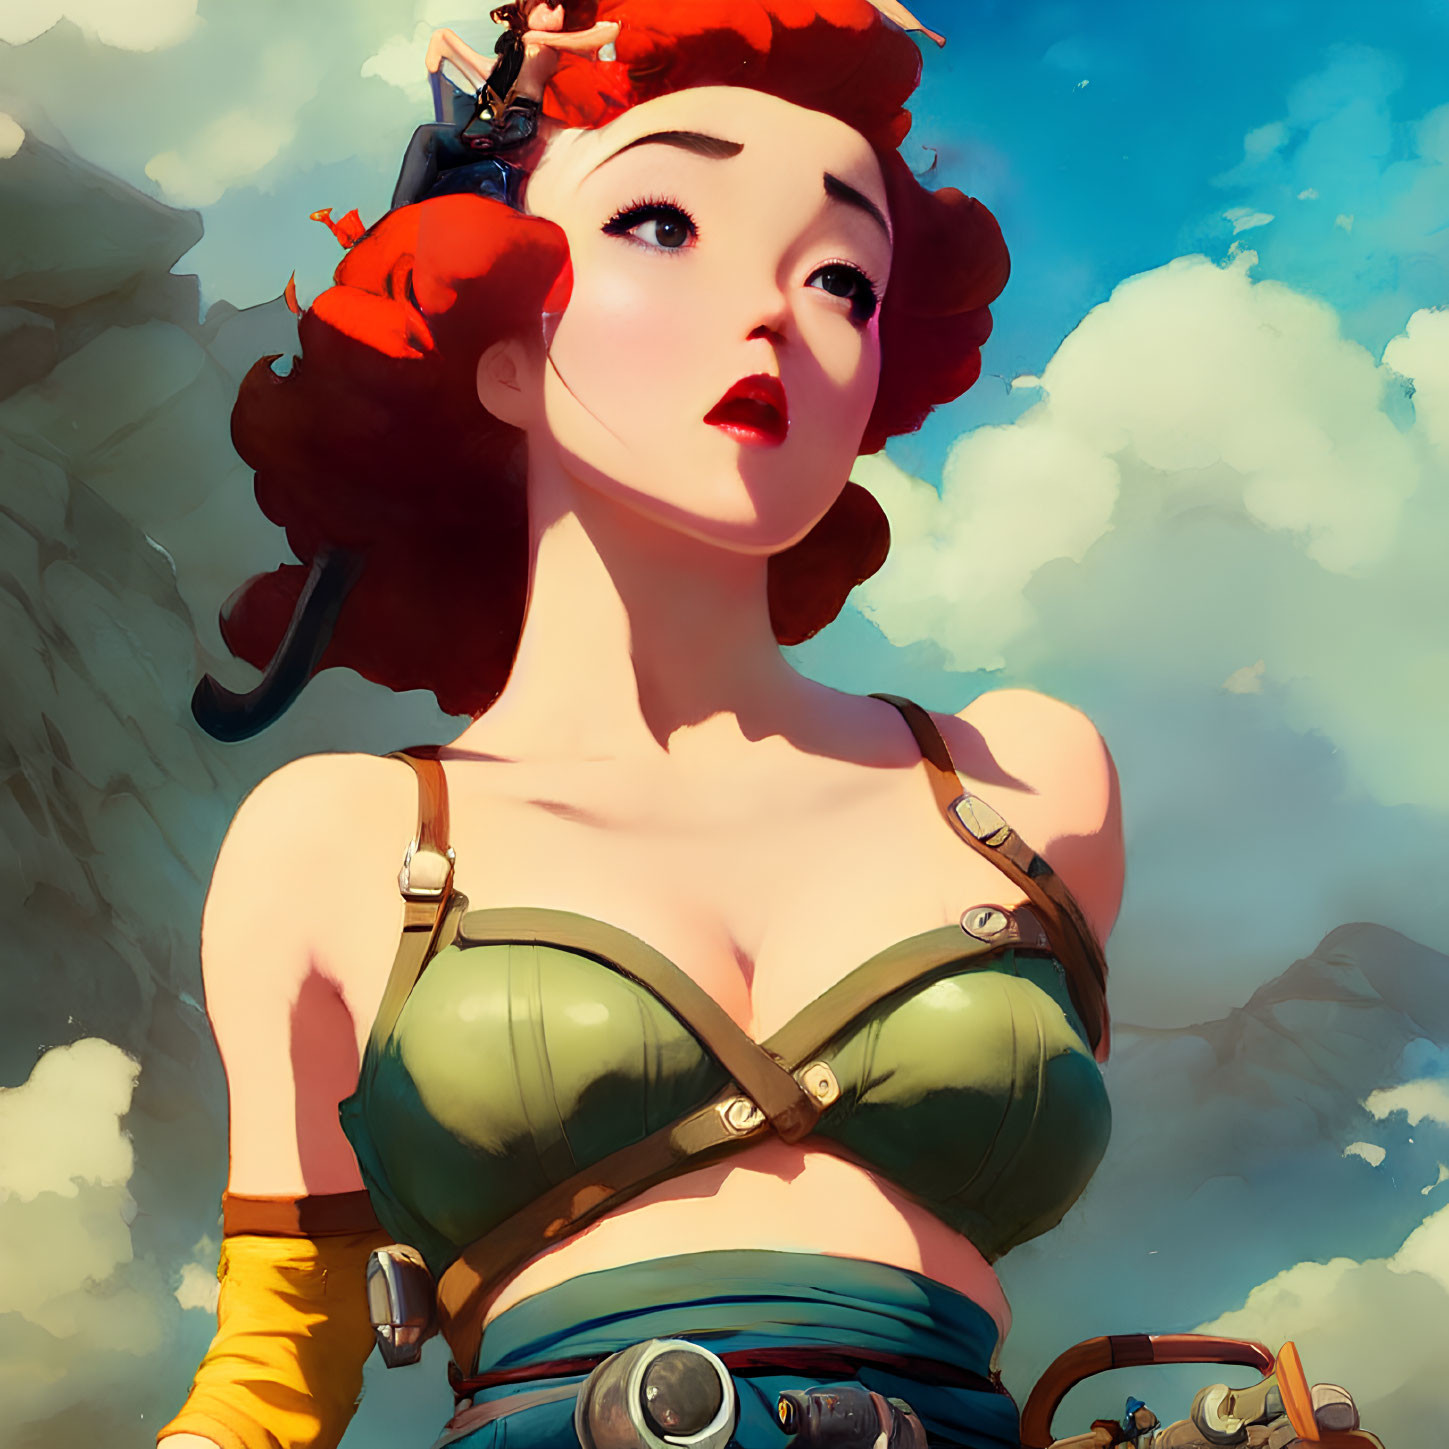 Red-haired woman with victory rolls and octopus headpiece in retro outfit against cloudy sky